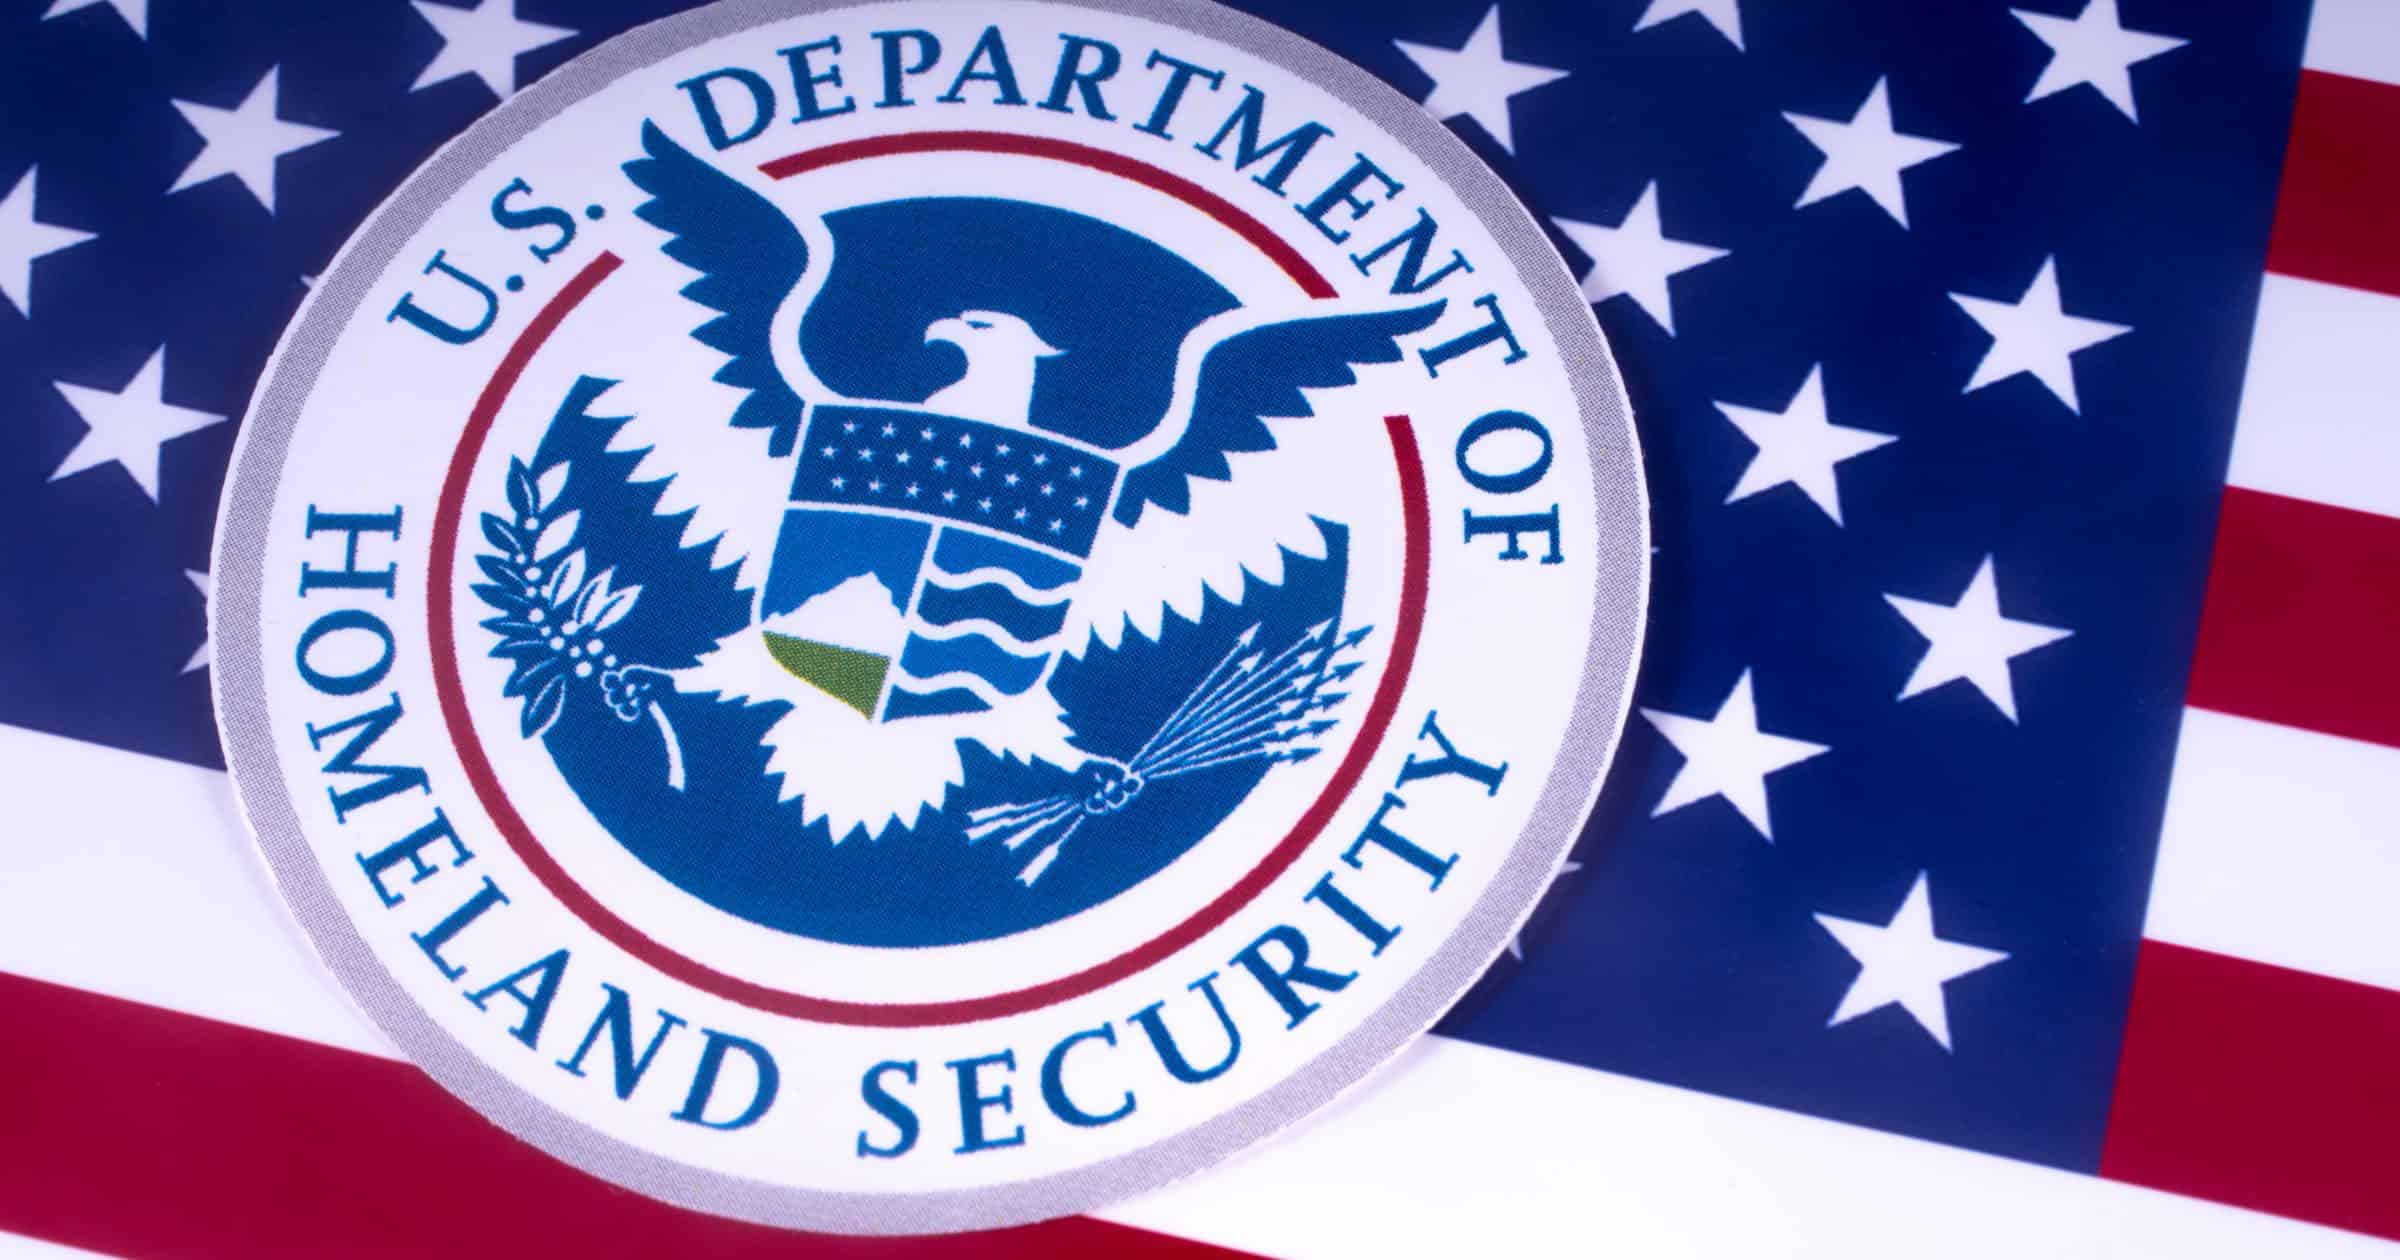 DHS Announces ‘Hack DHS’ Bug Bounty Program to Improve Security